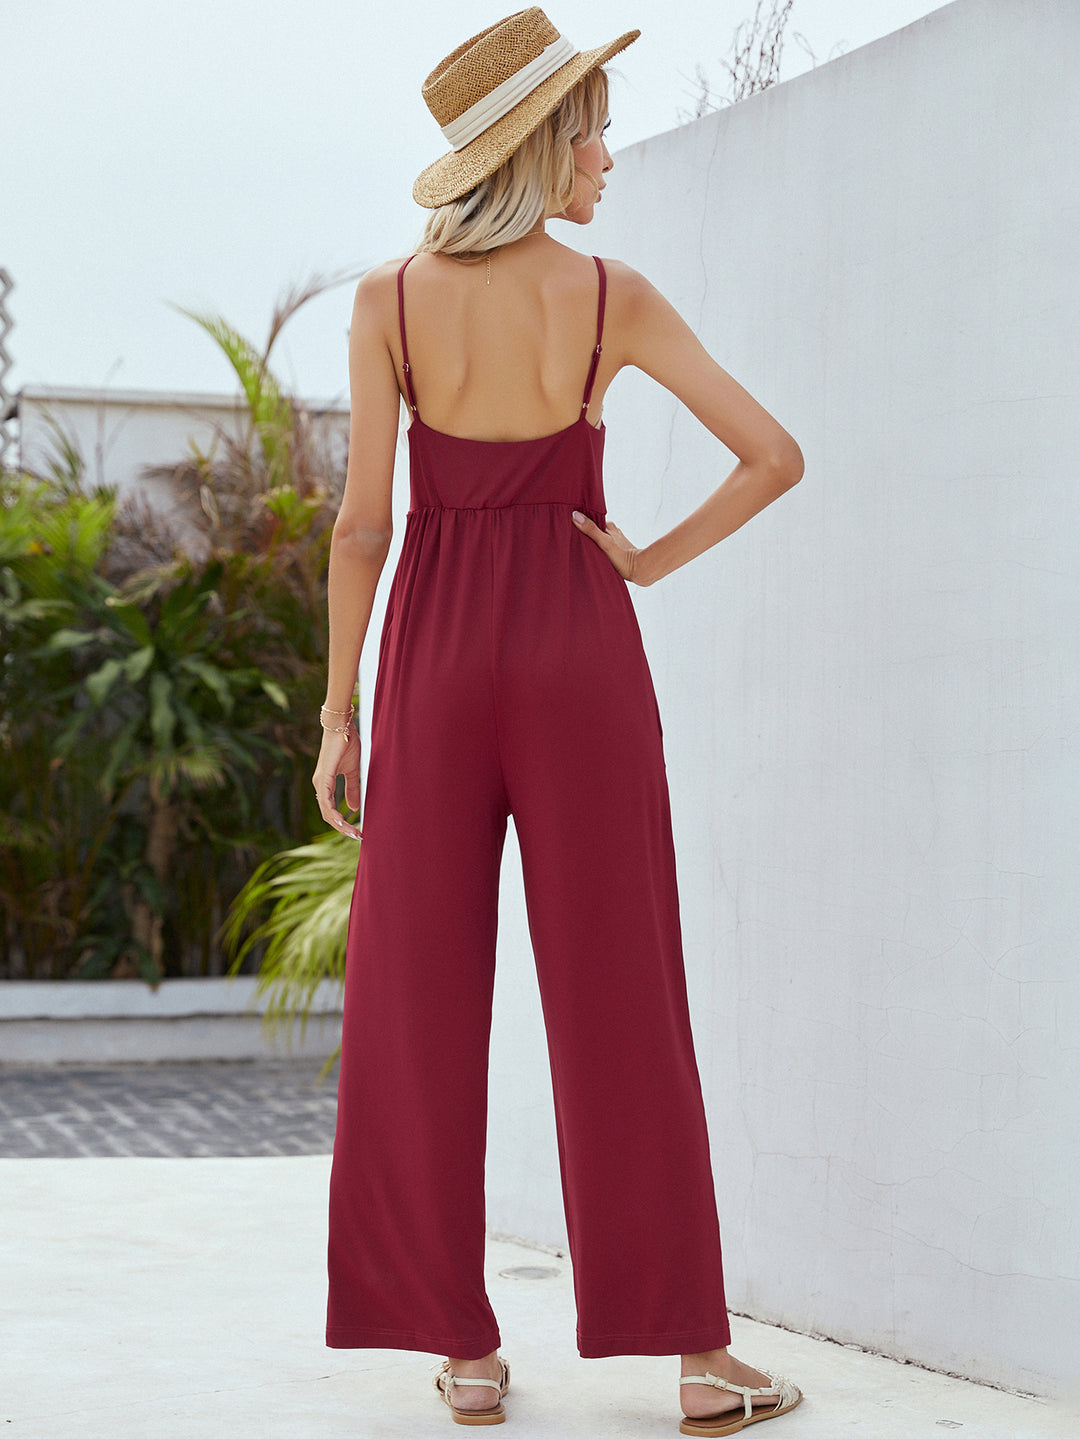 Adjustable Spaghetti Strap Jumpsuit with Pockets - Runway Frenzy